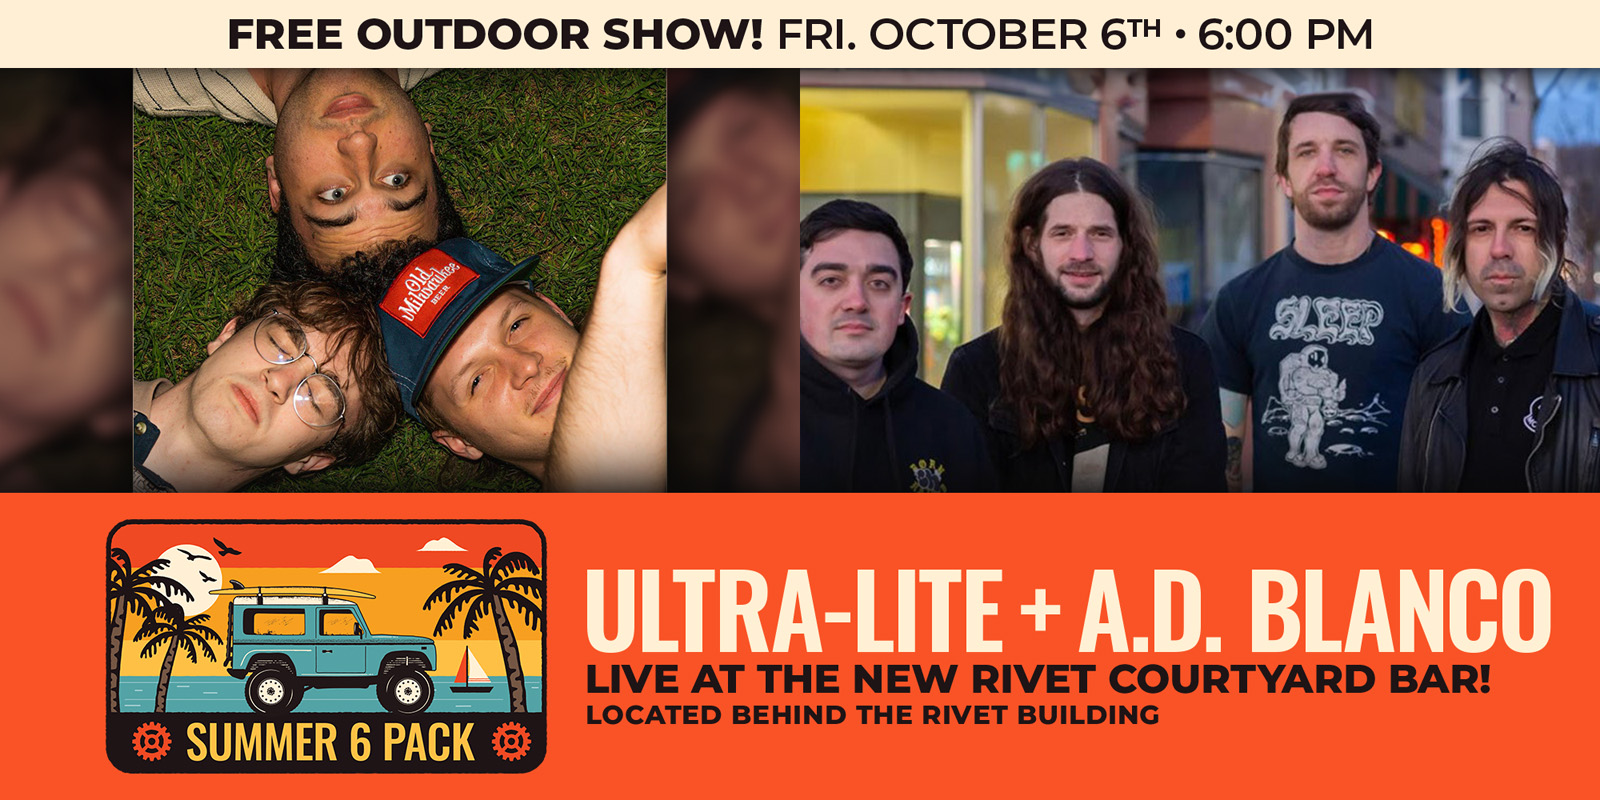 The Rivet Free Outdoor Series continues on Friday, October 6th, with Ultra-Lite (Philly) and A.D. Blanco (on tour from Athens, GA) live on the Courtyard Bar Stage! The bar opens at 6 PM. Music 7 - 10 PM.